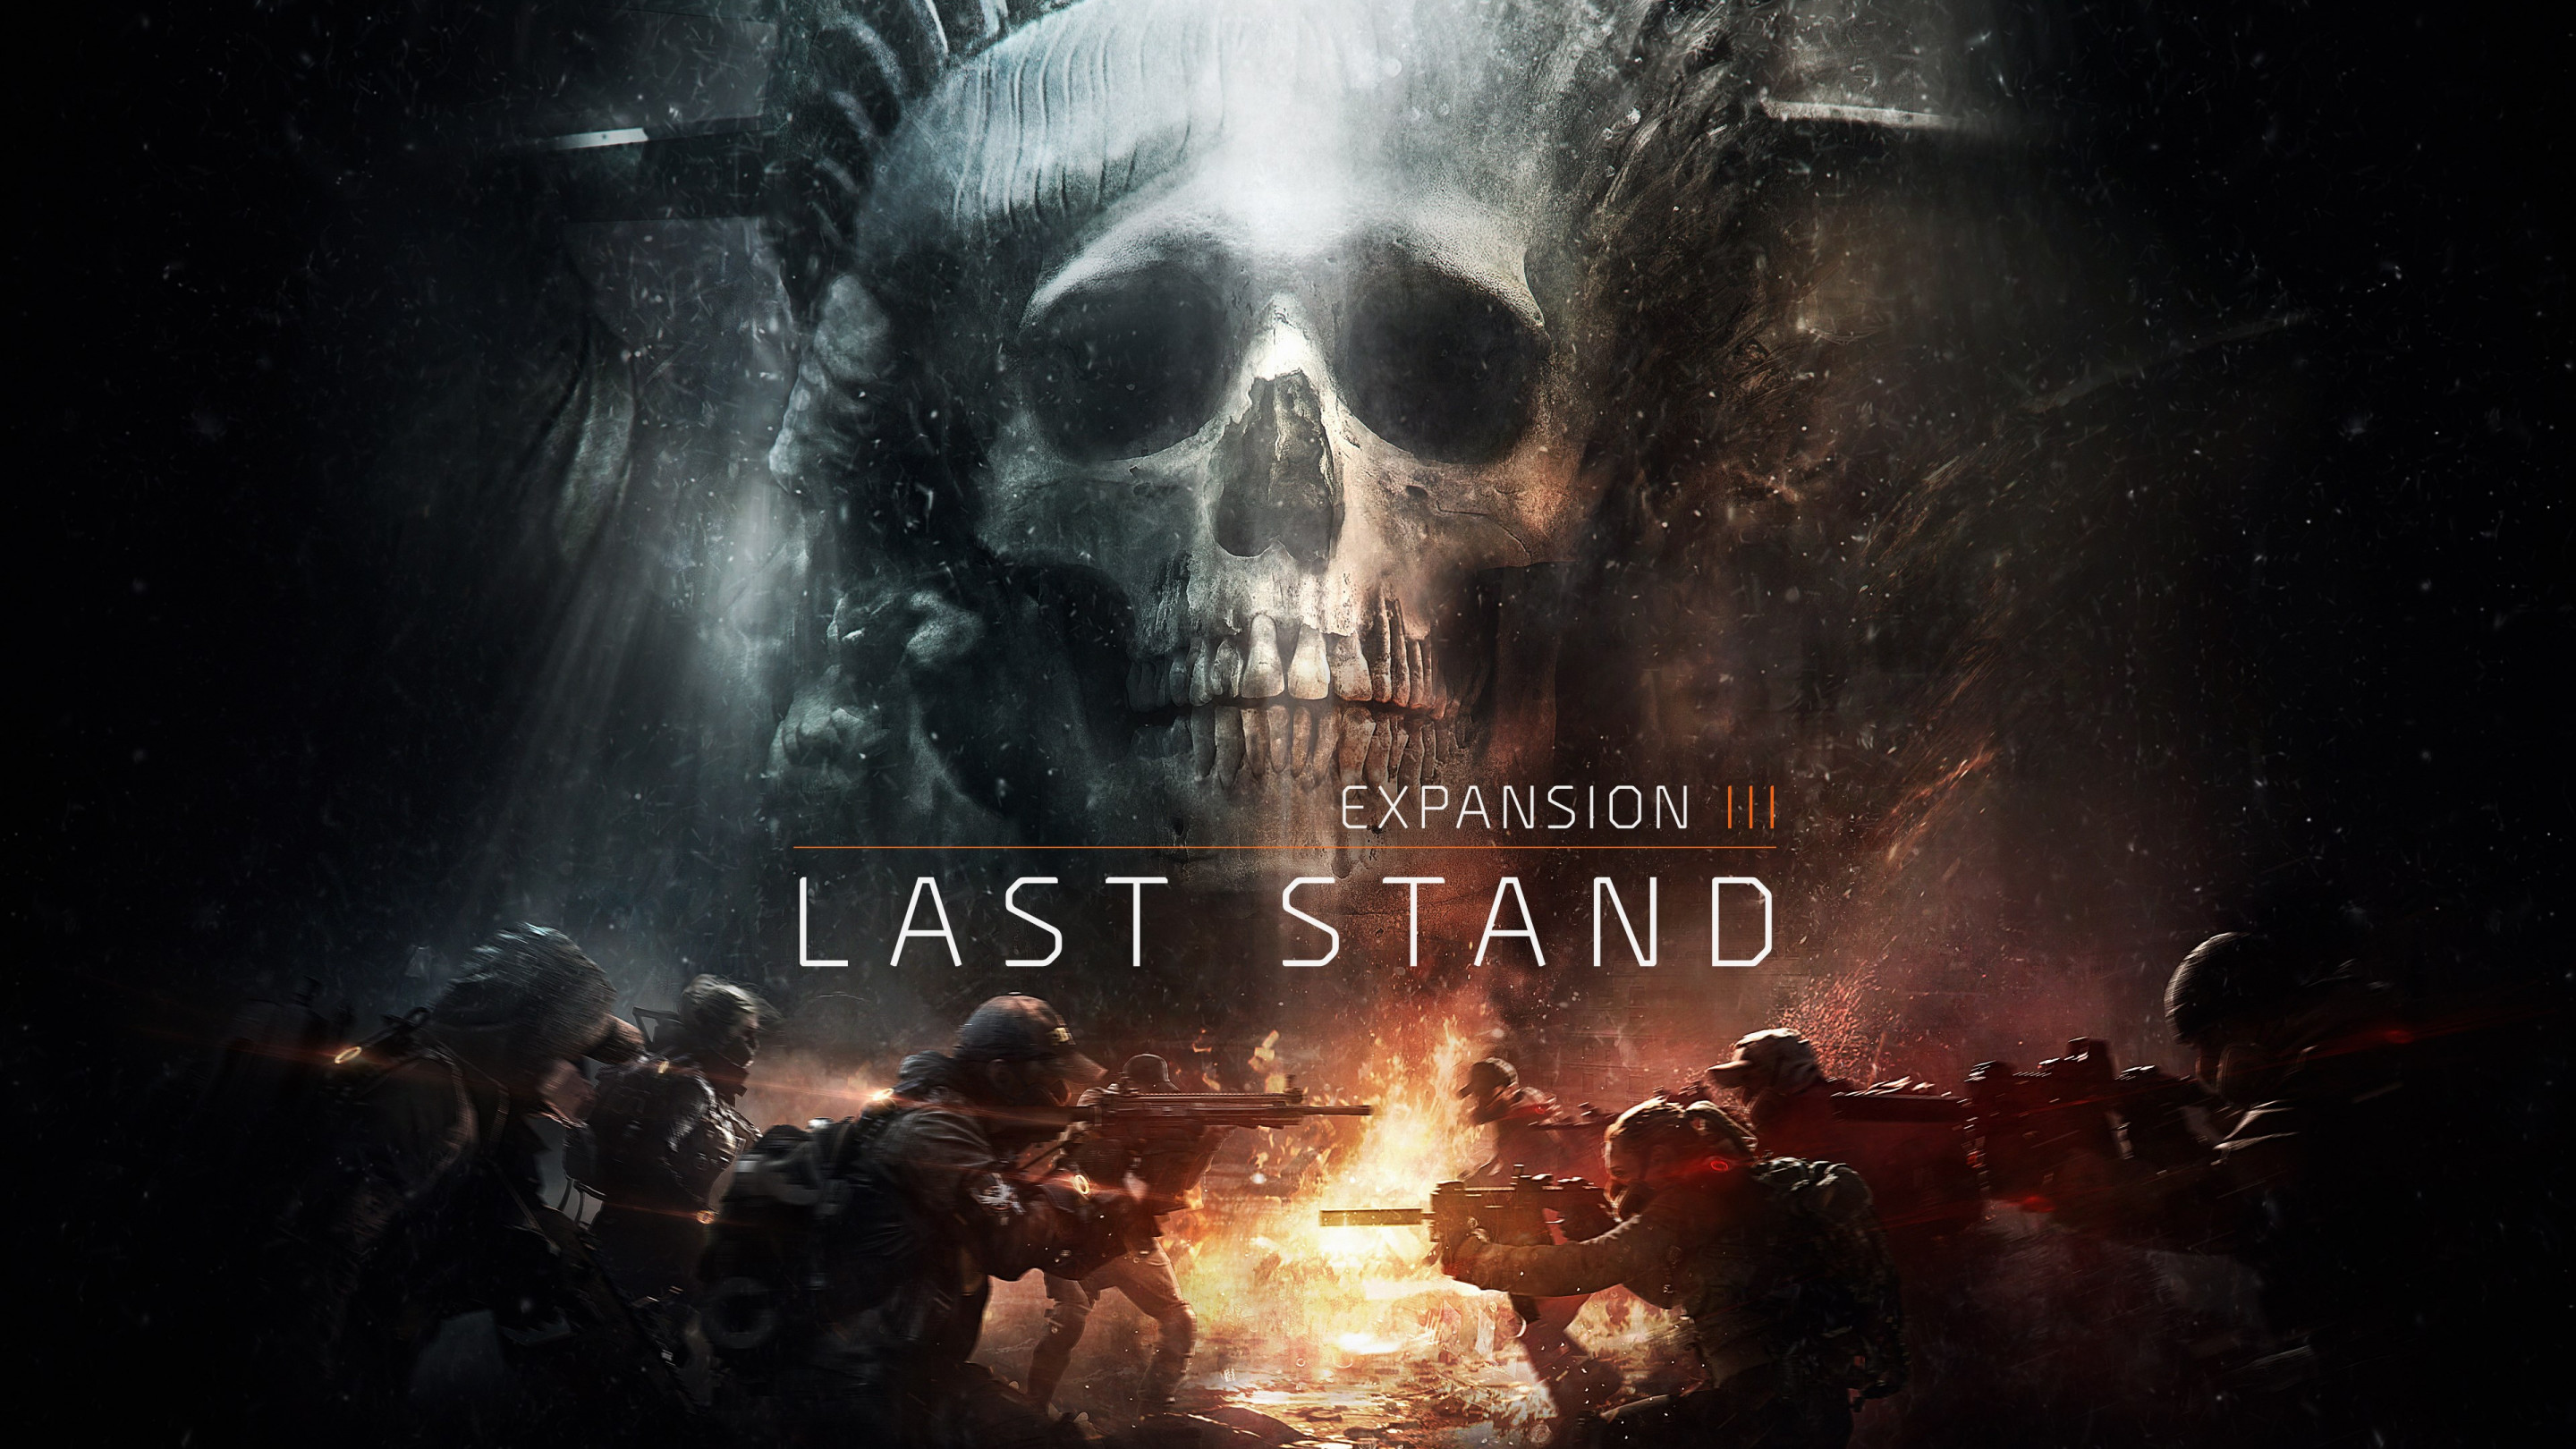 The Division Last Stand Expansion 3 wallpaper 2880x1620